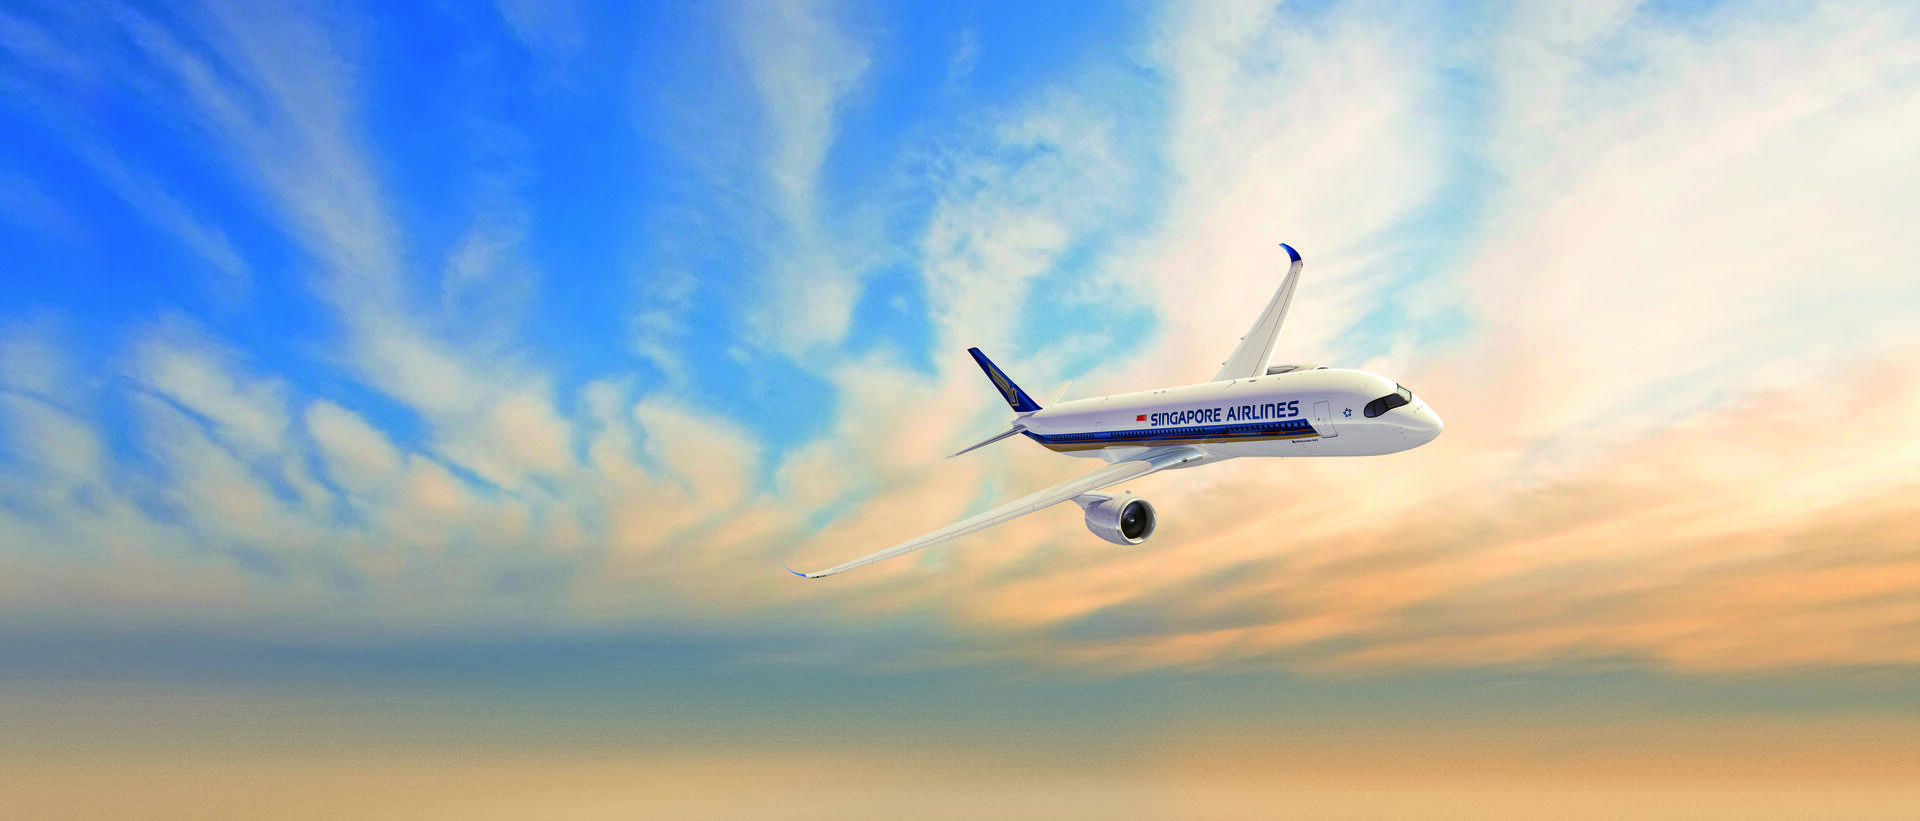 SINGAPORE AIRLINES GROUP ORDERS SUSTAINABLE AVIATION FUEL FROM NESTE